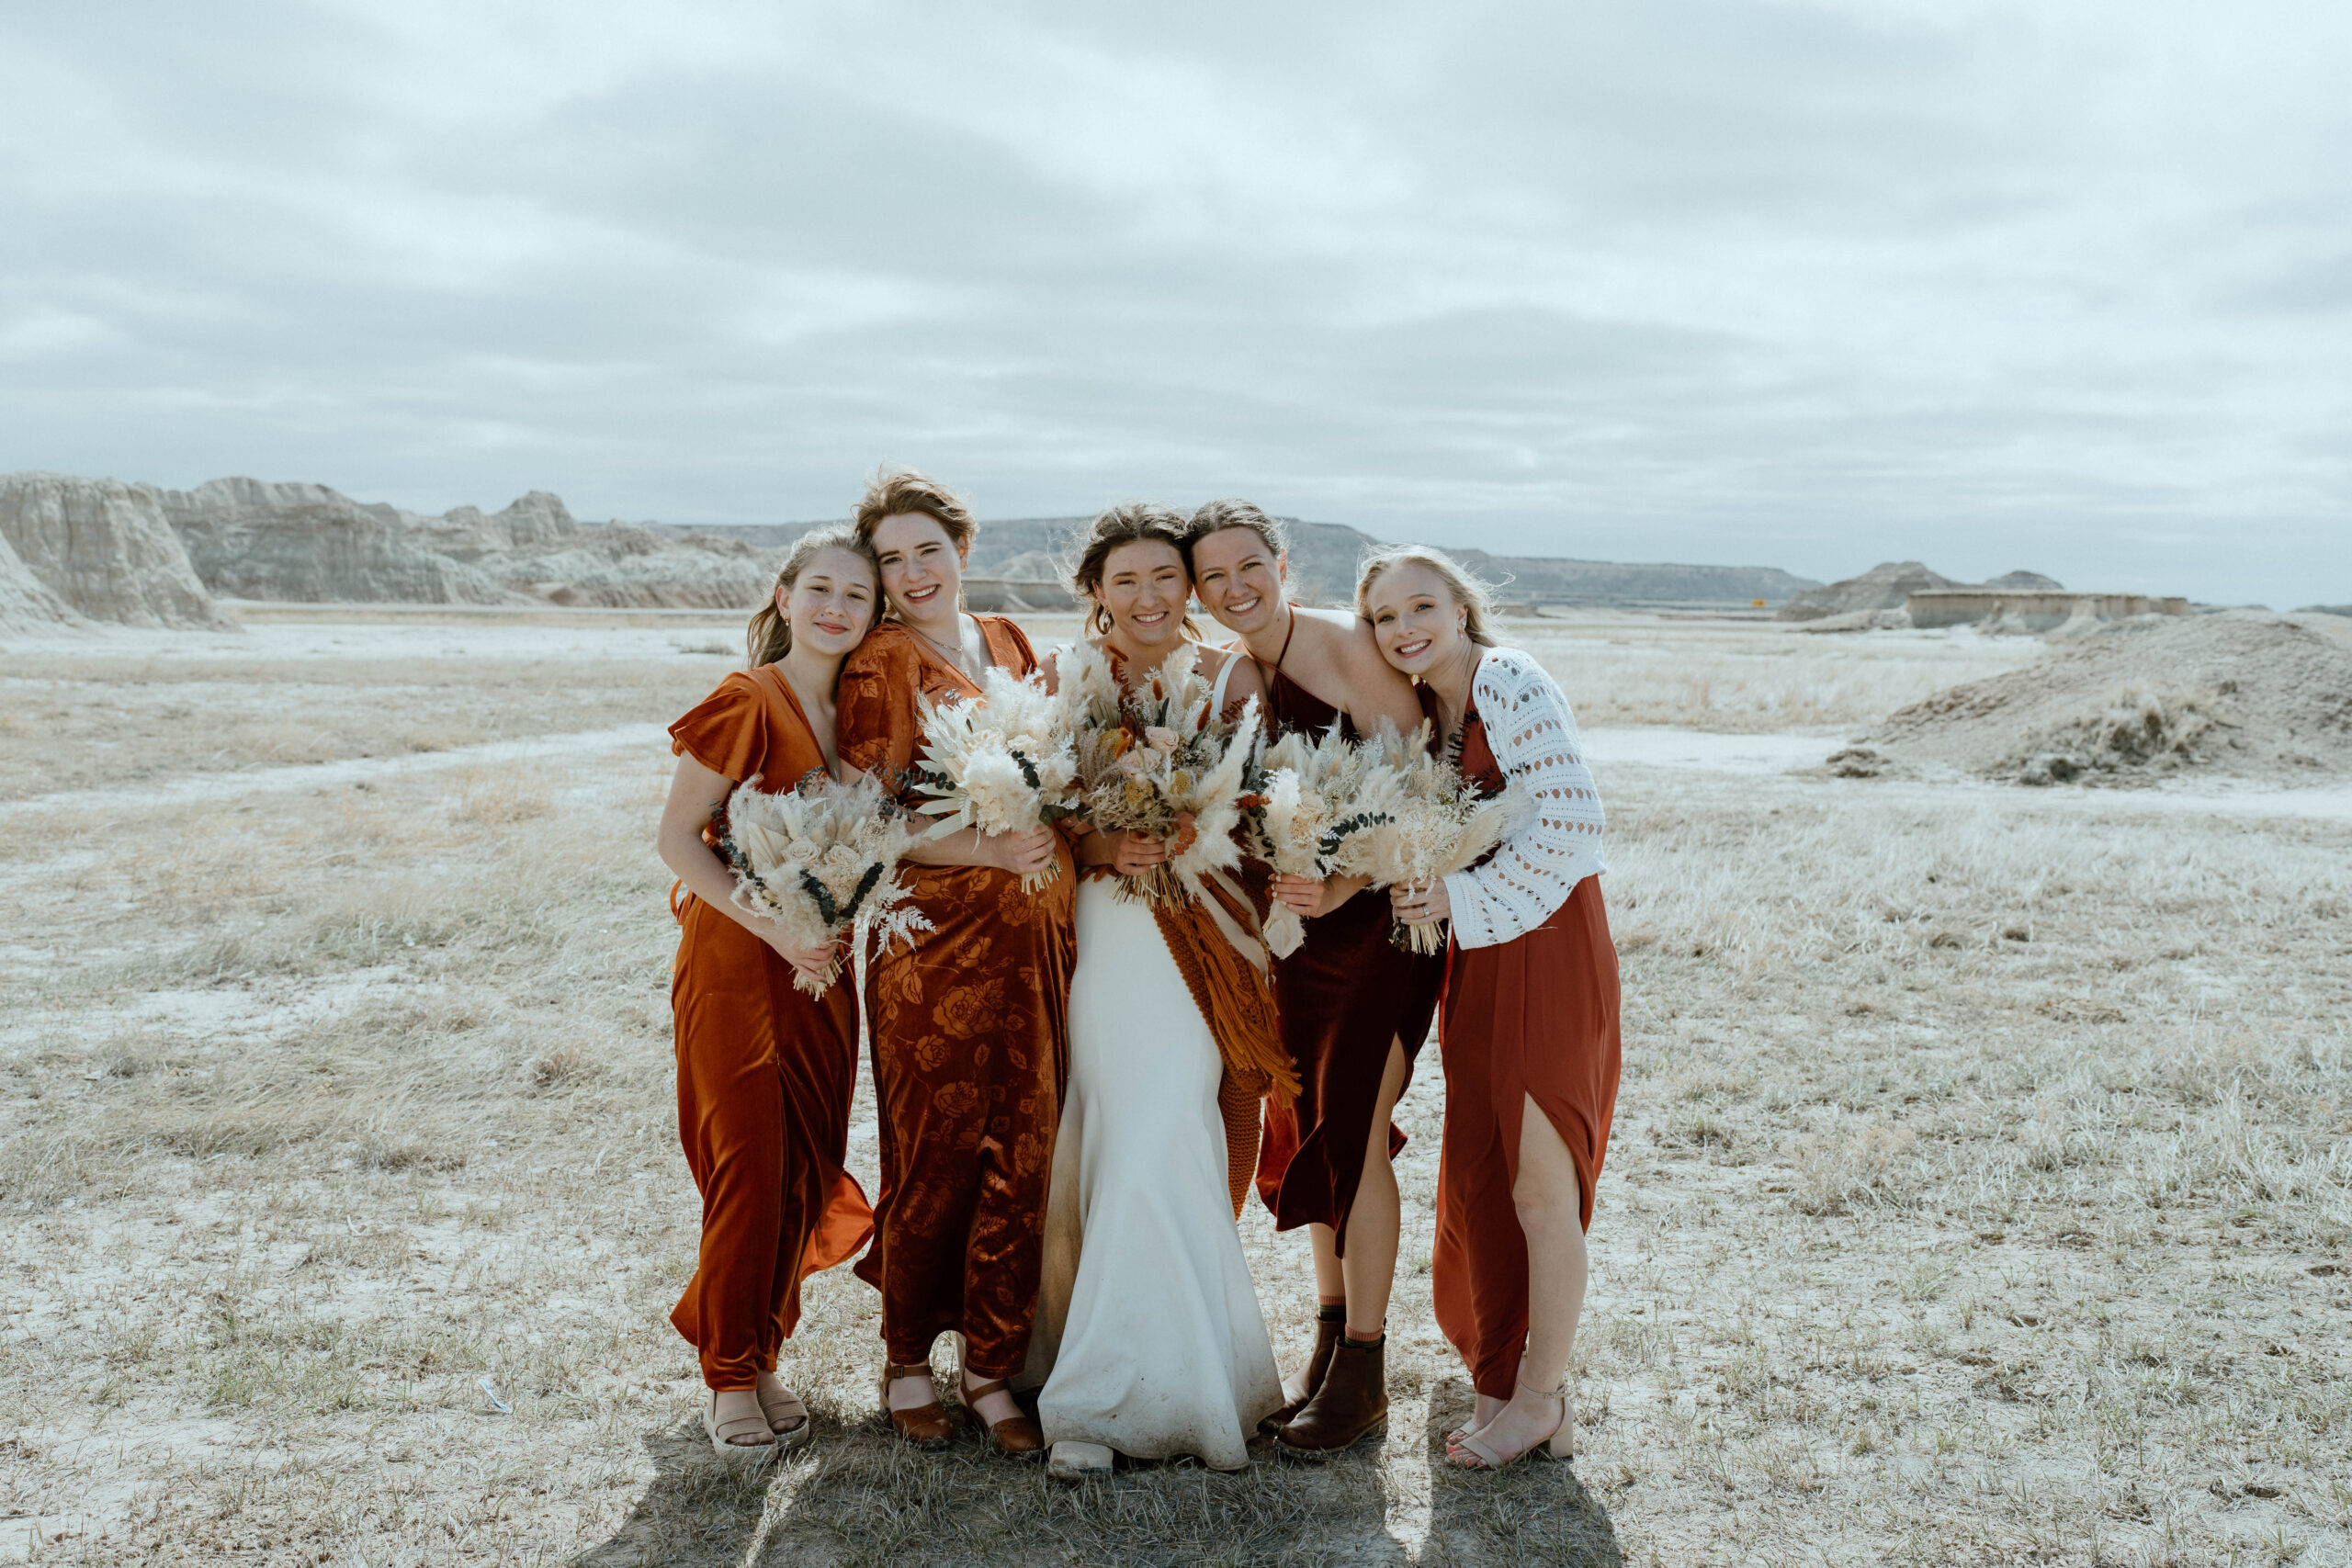 A bridal party is pictured with the bride and wearing burnt orange wedding attire